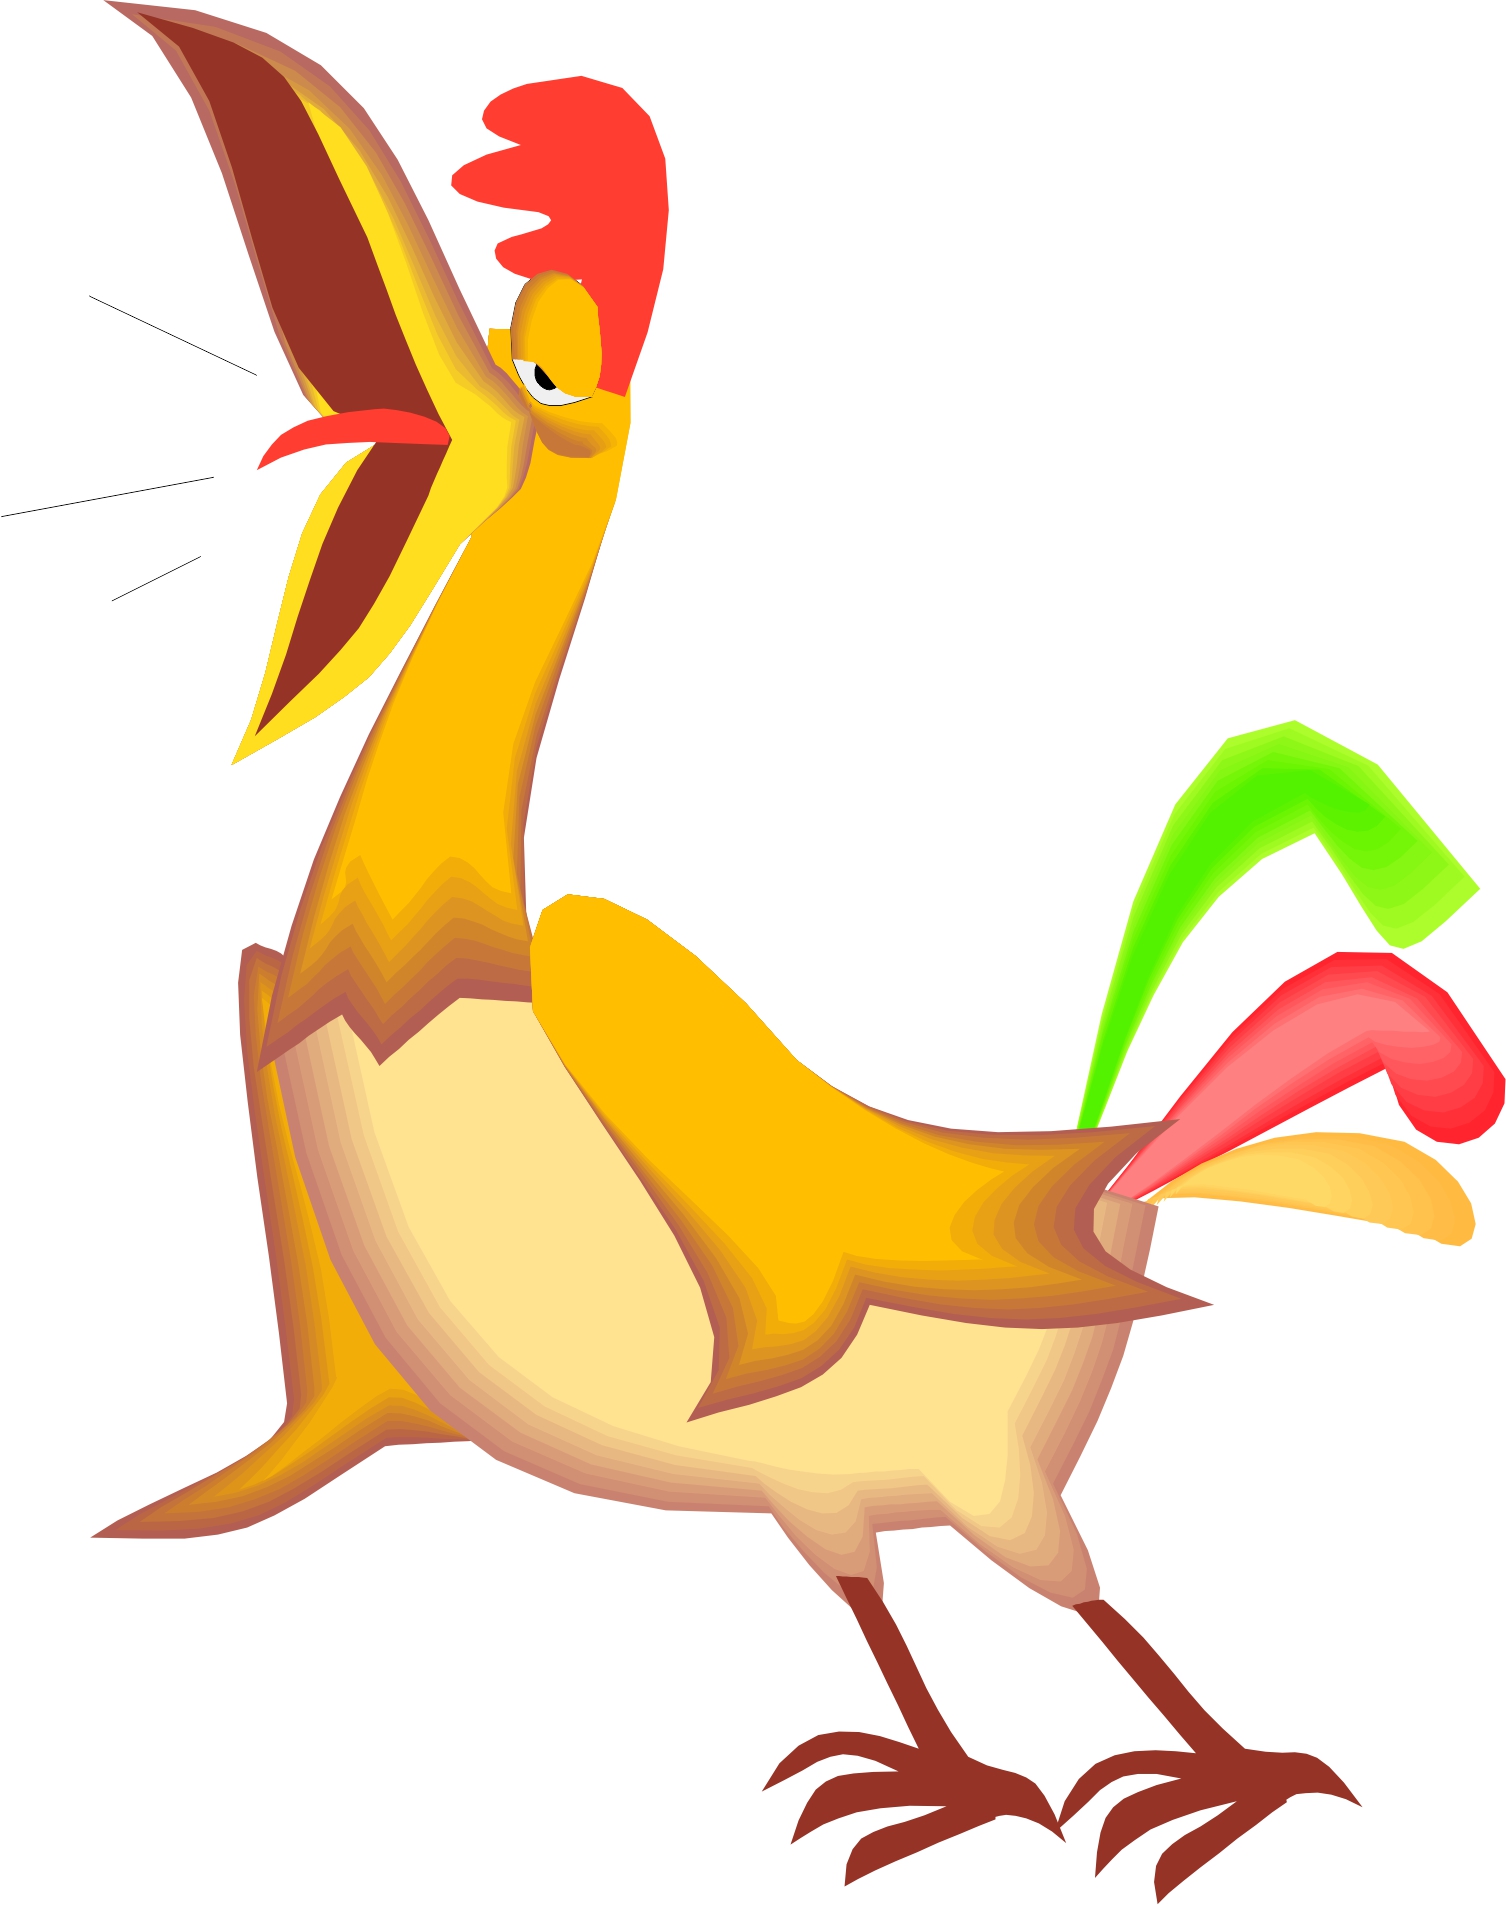 rooster crowing clipart free - photo #39